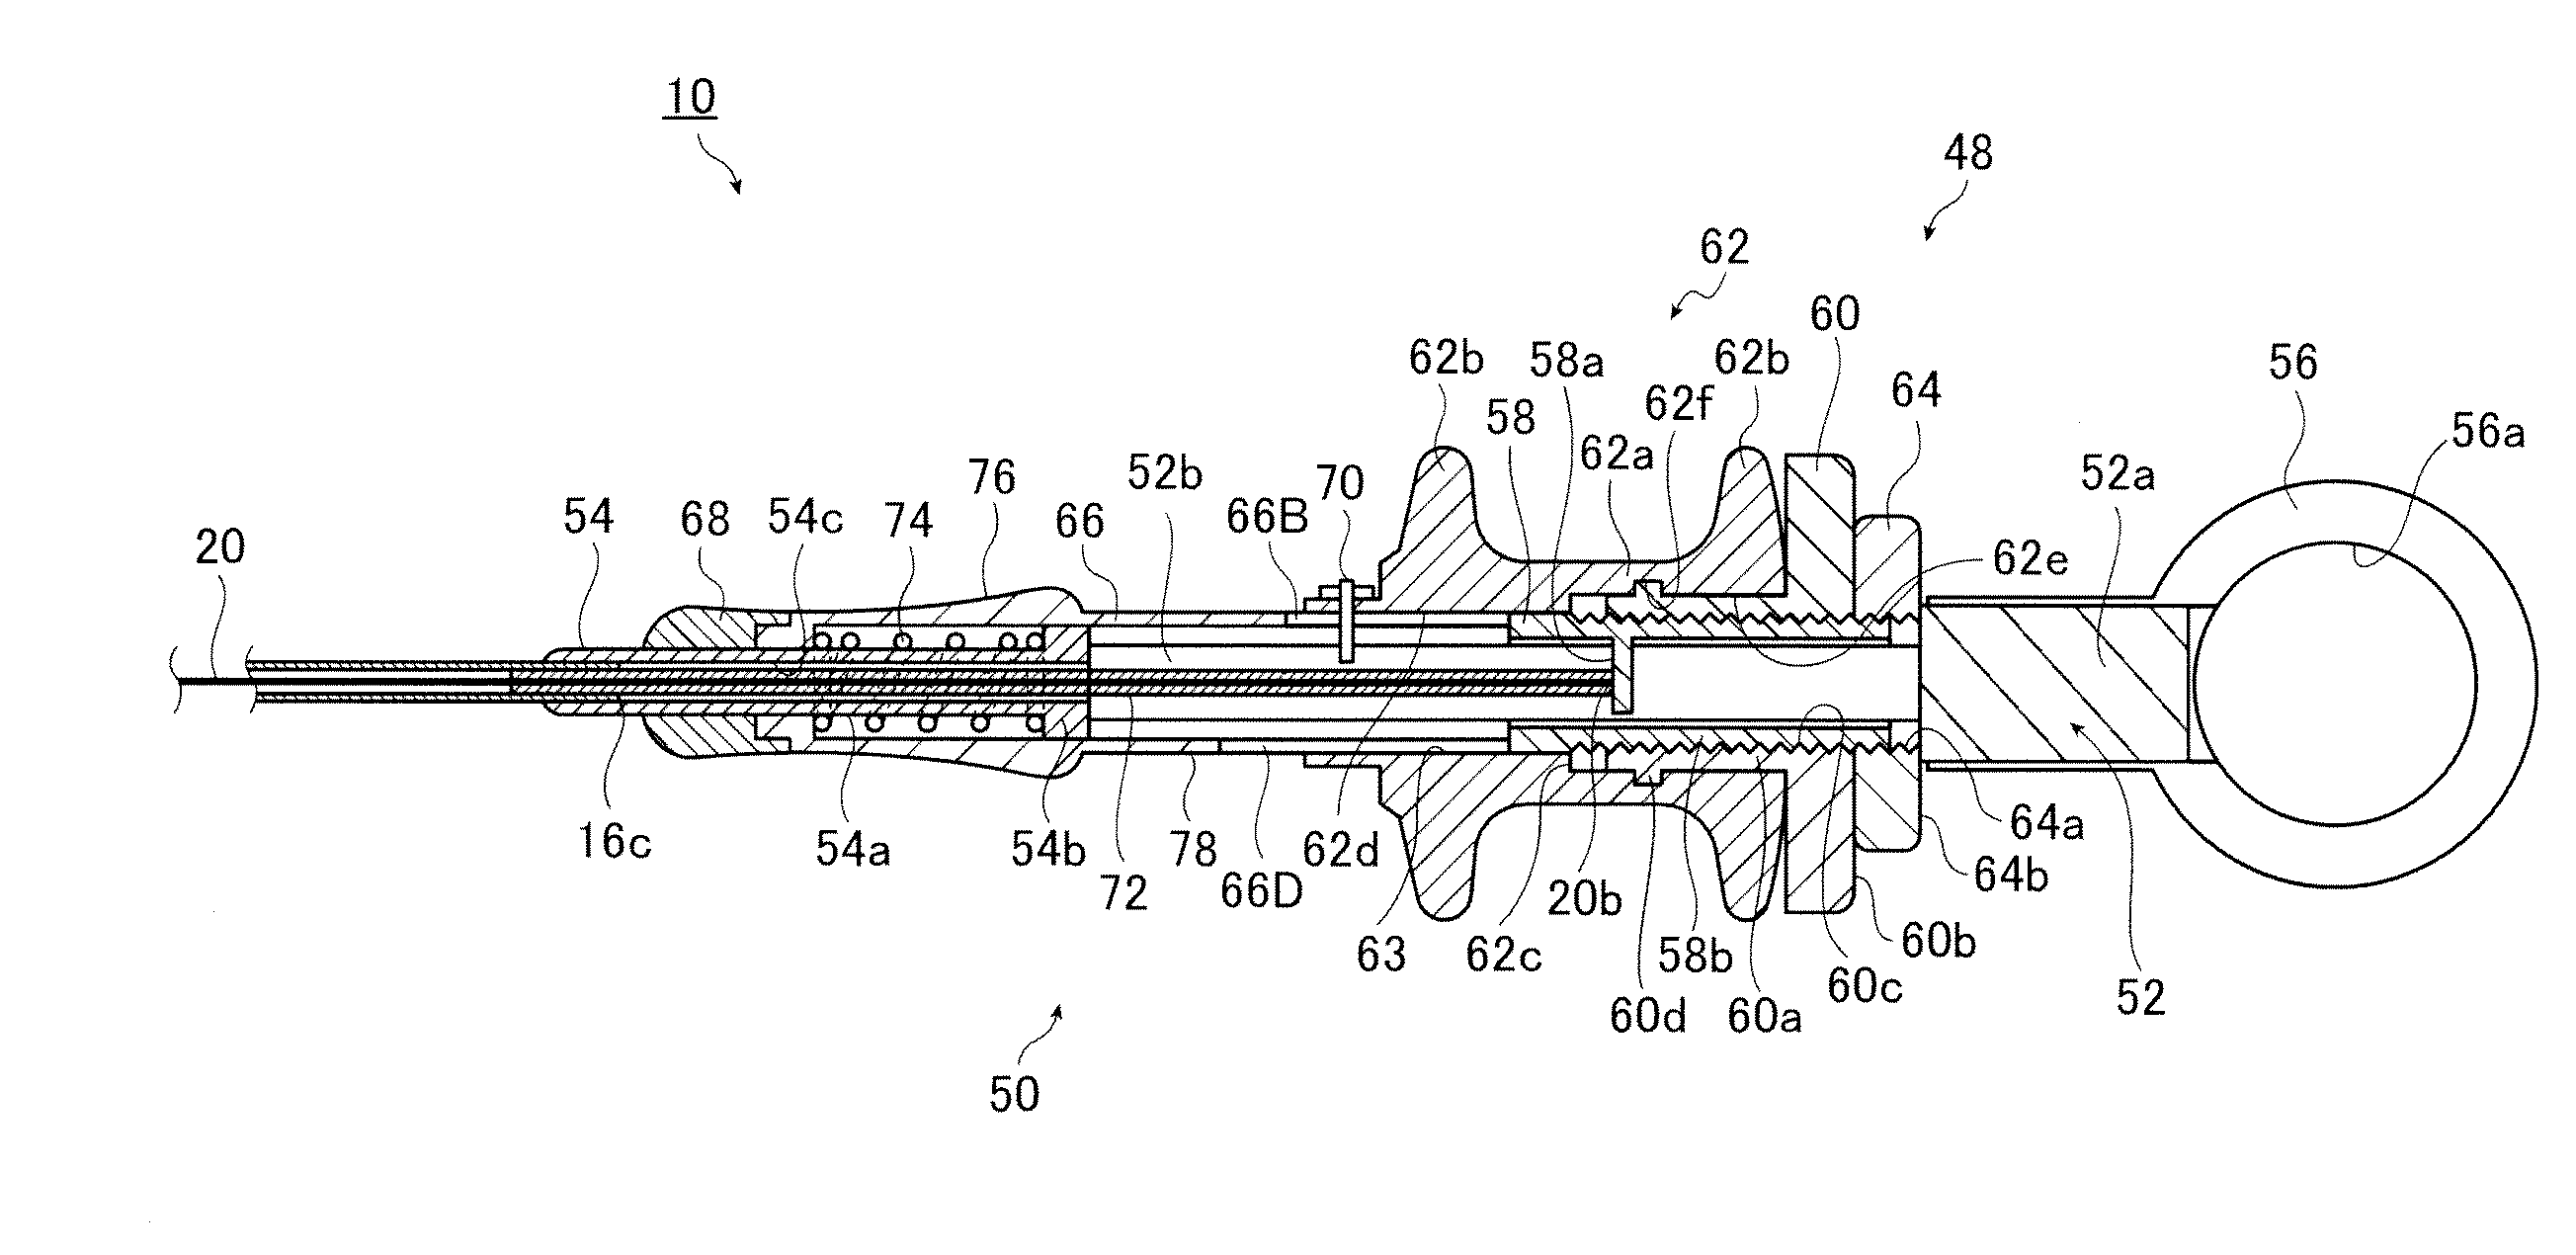 Repetitive clipping treatment device